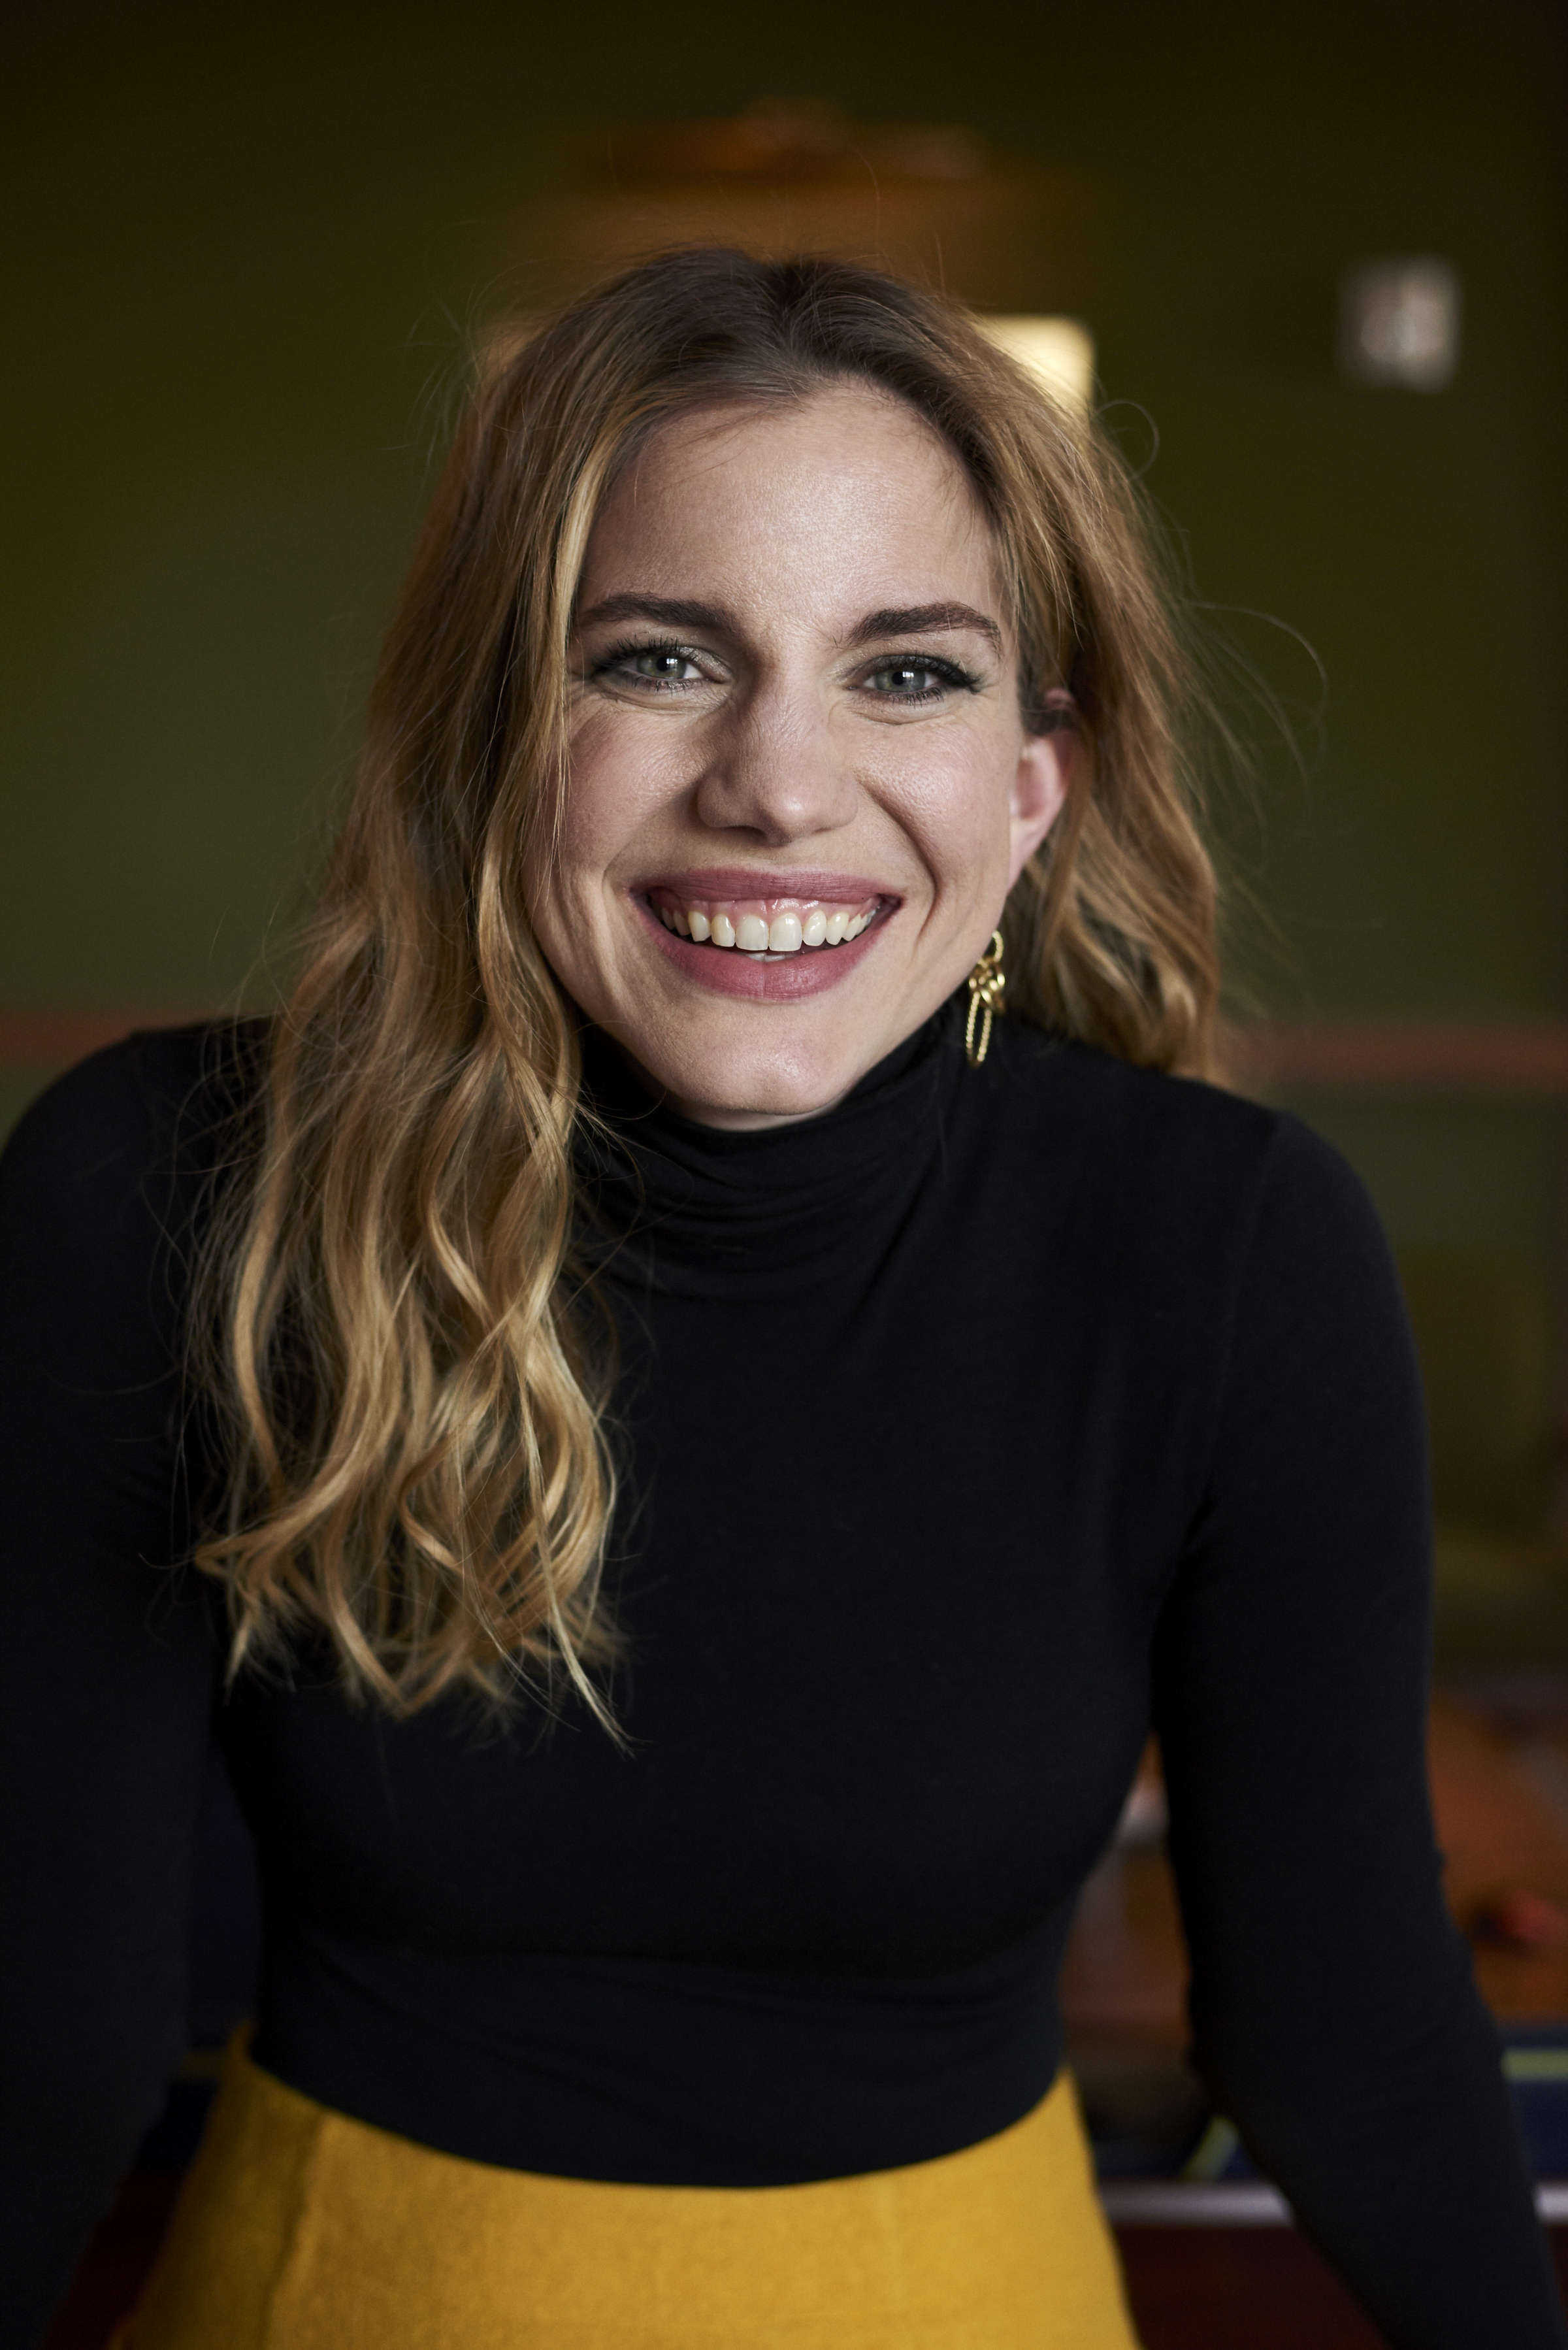 ROSE & IVY Mornings with Anna Chlumsky.